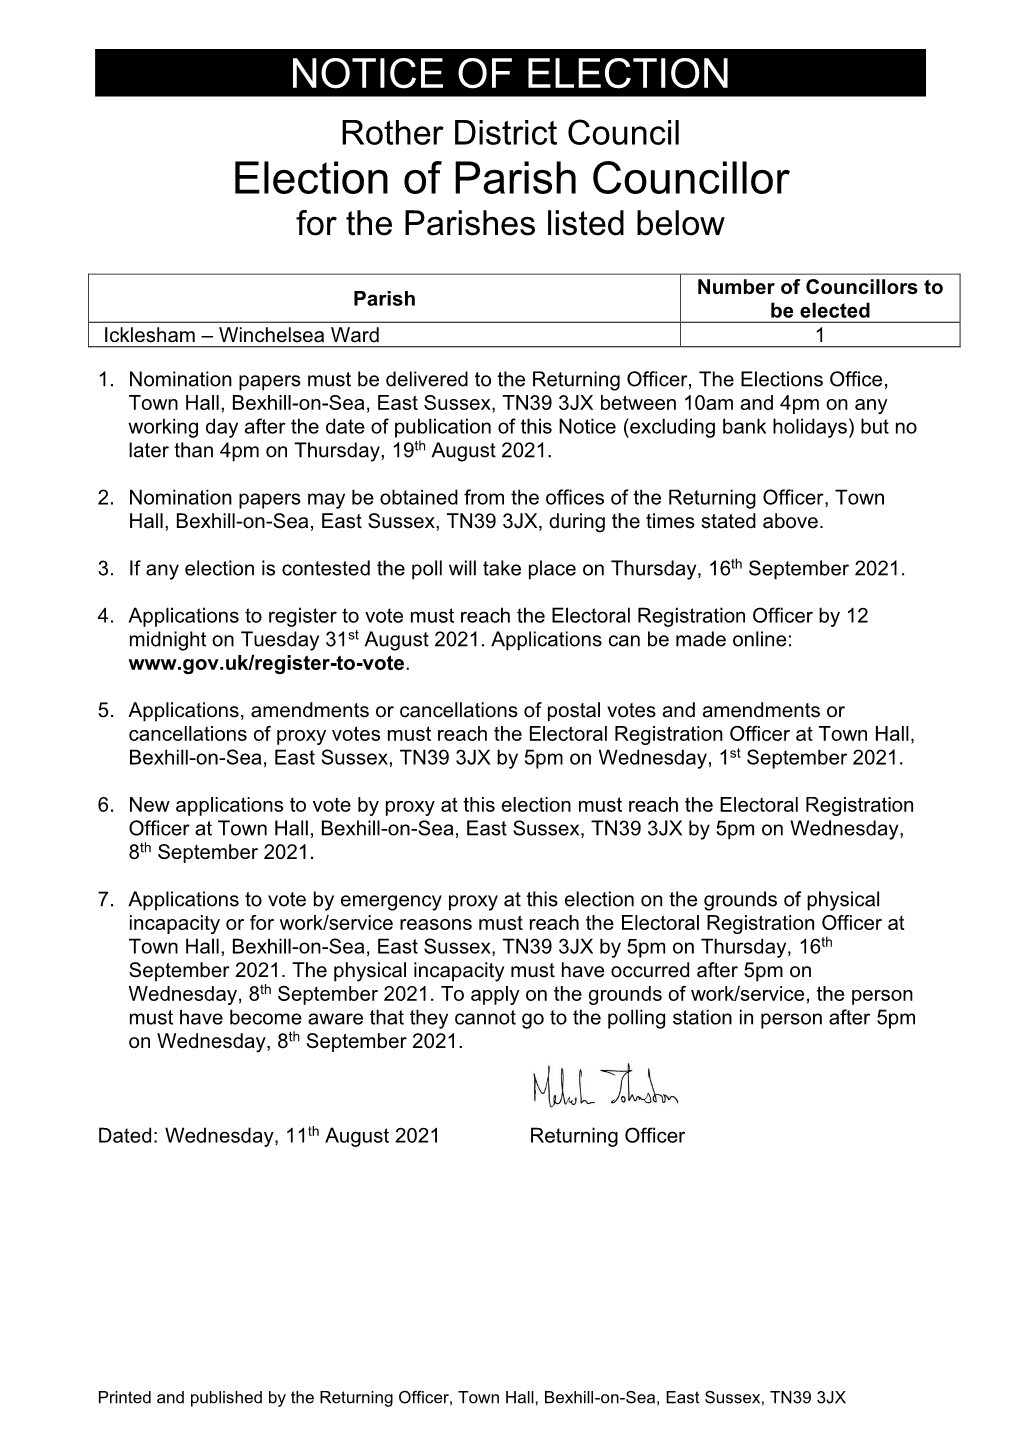 Election of Parish Councillor for the Parishes Listed Below